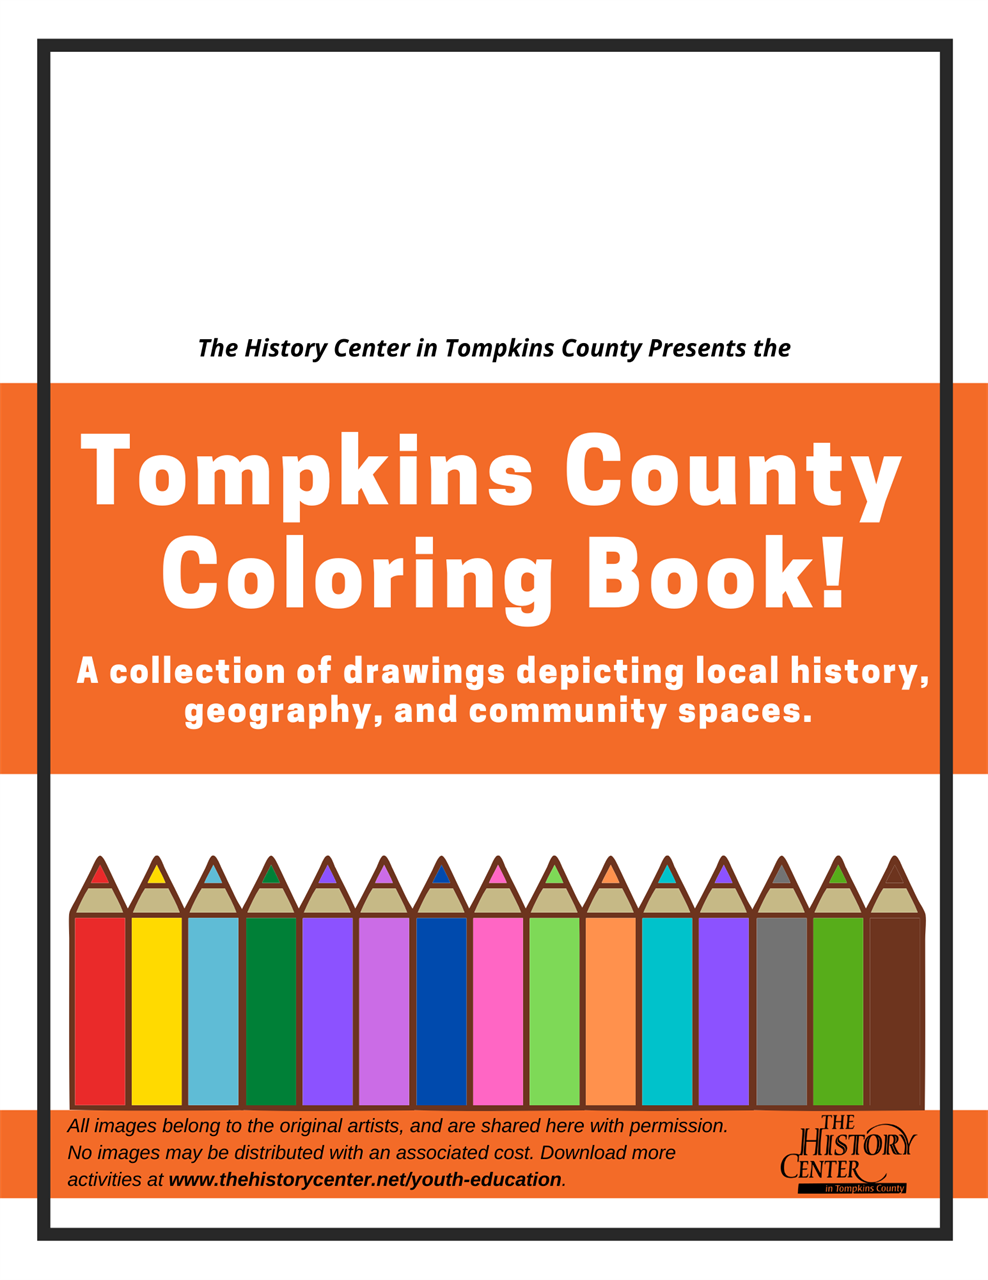 A link/image to a downloadable activity called "Tompkins County Coloring Book!"